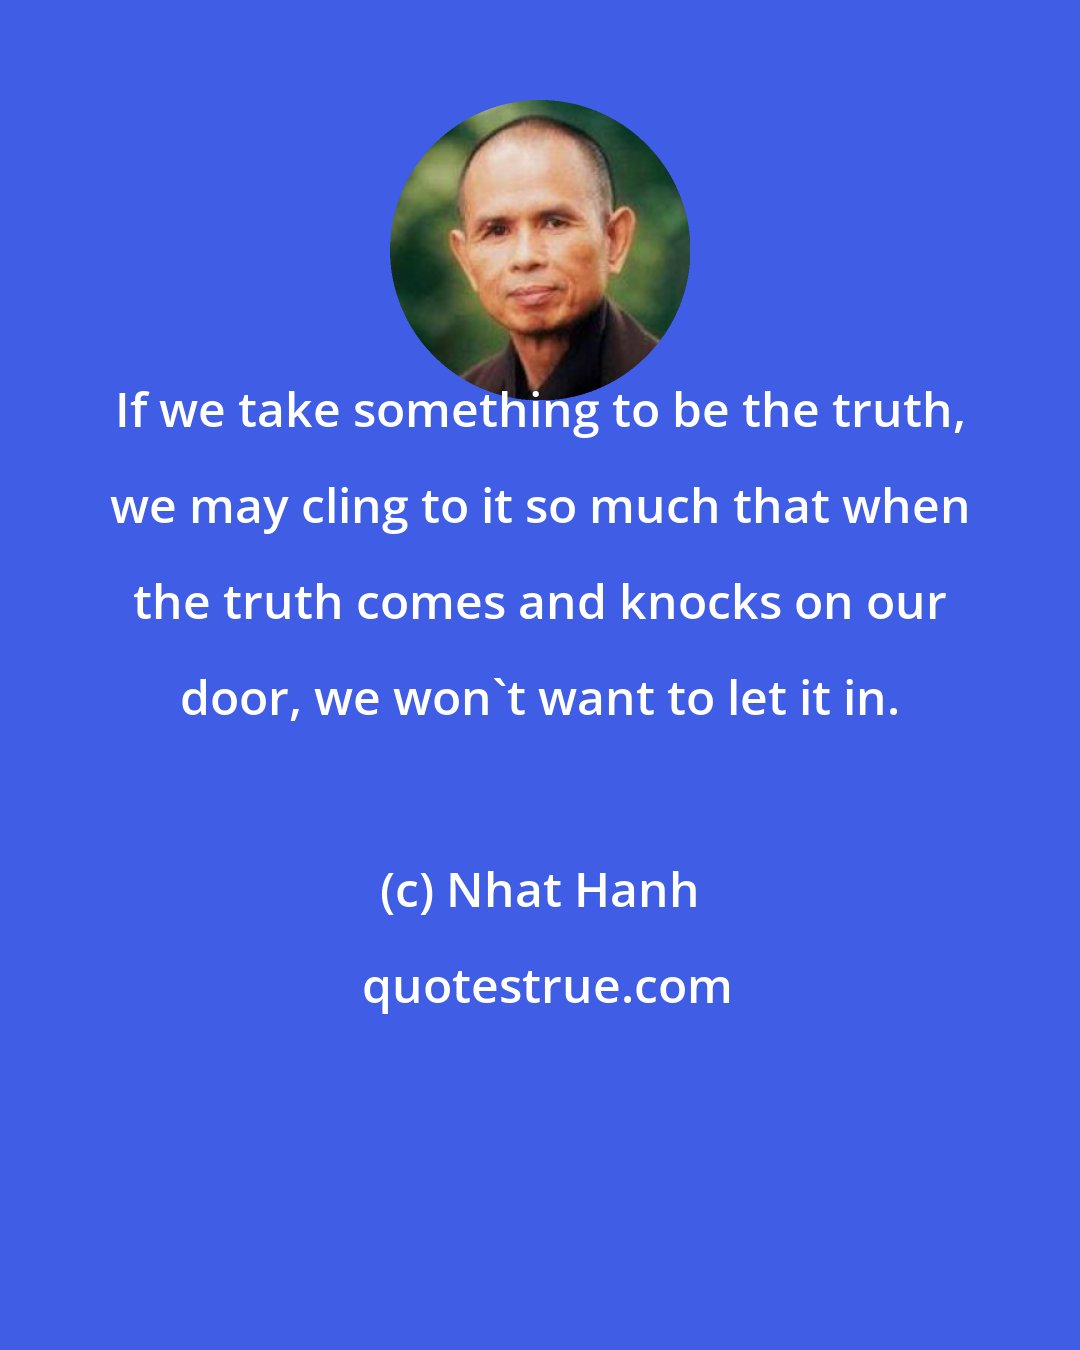 Nhat Hanh: If we take something to be the truth, we may cling to it so much that when the truth comes and knocks on our door, we won't want to let it in.